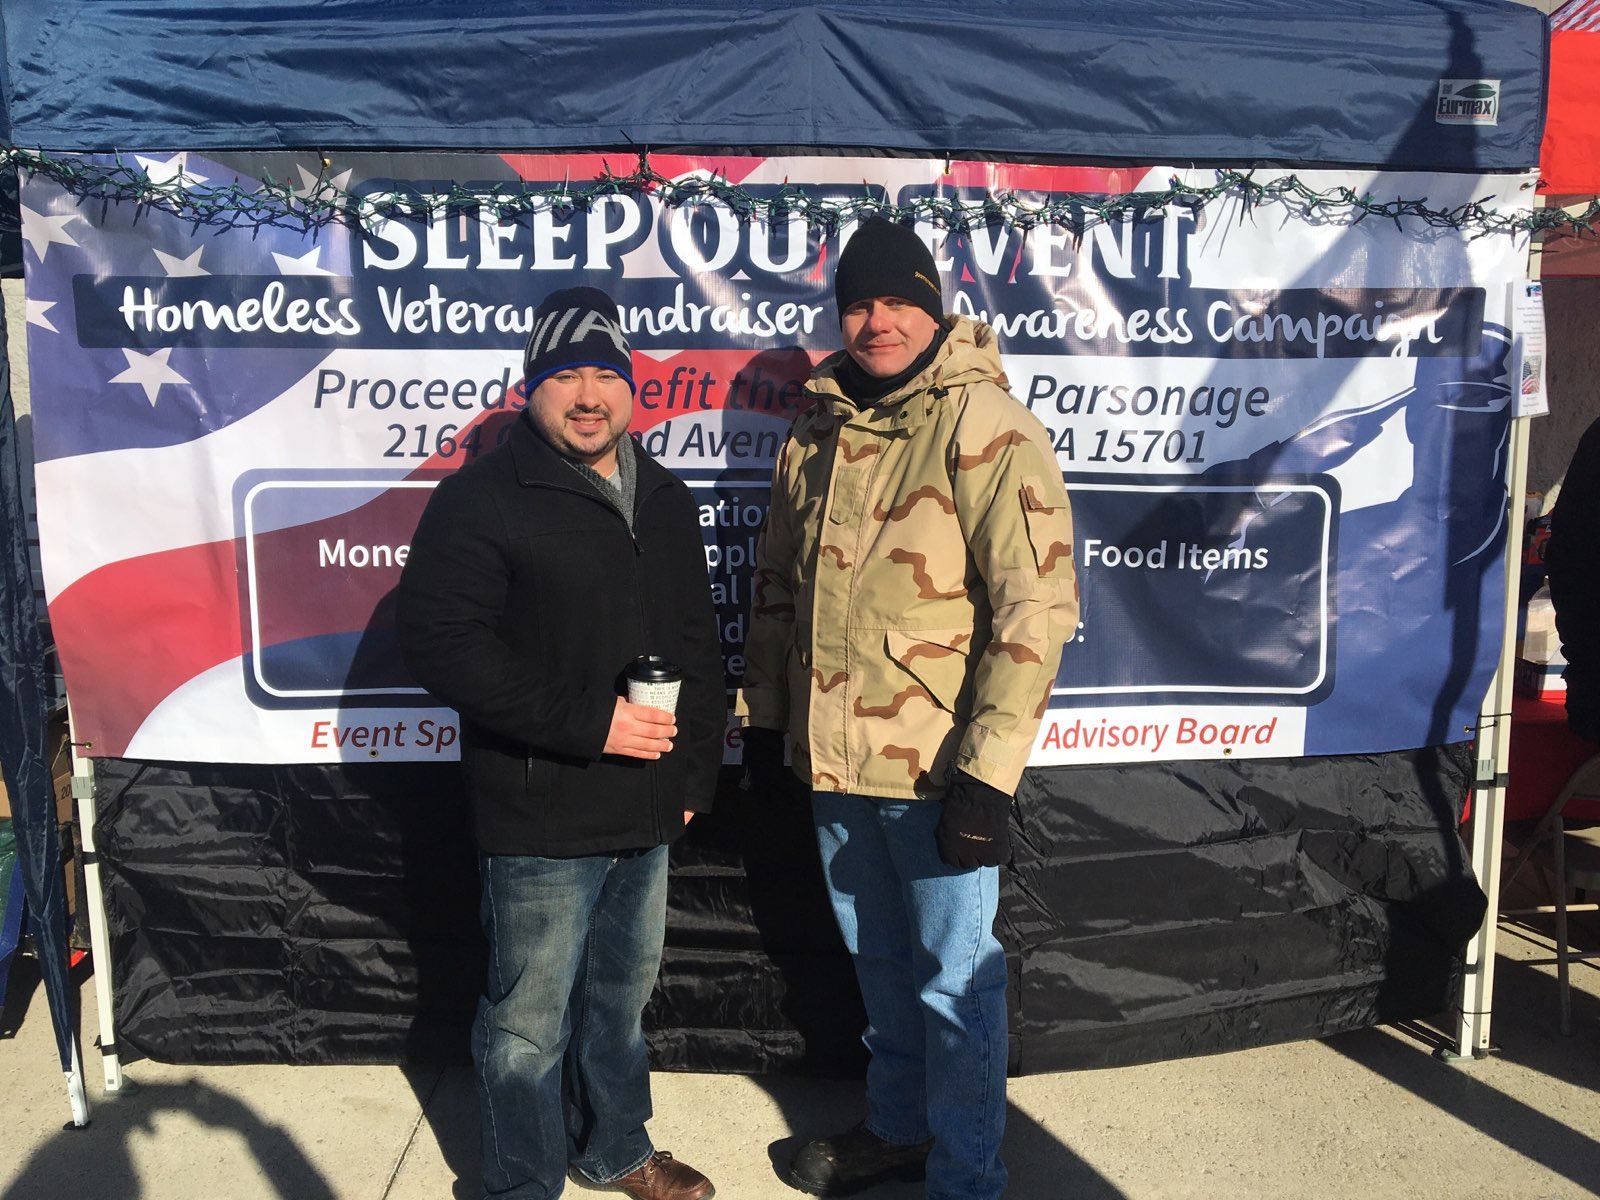 Two employees stand at a Sleepout event